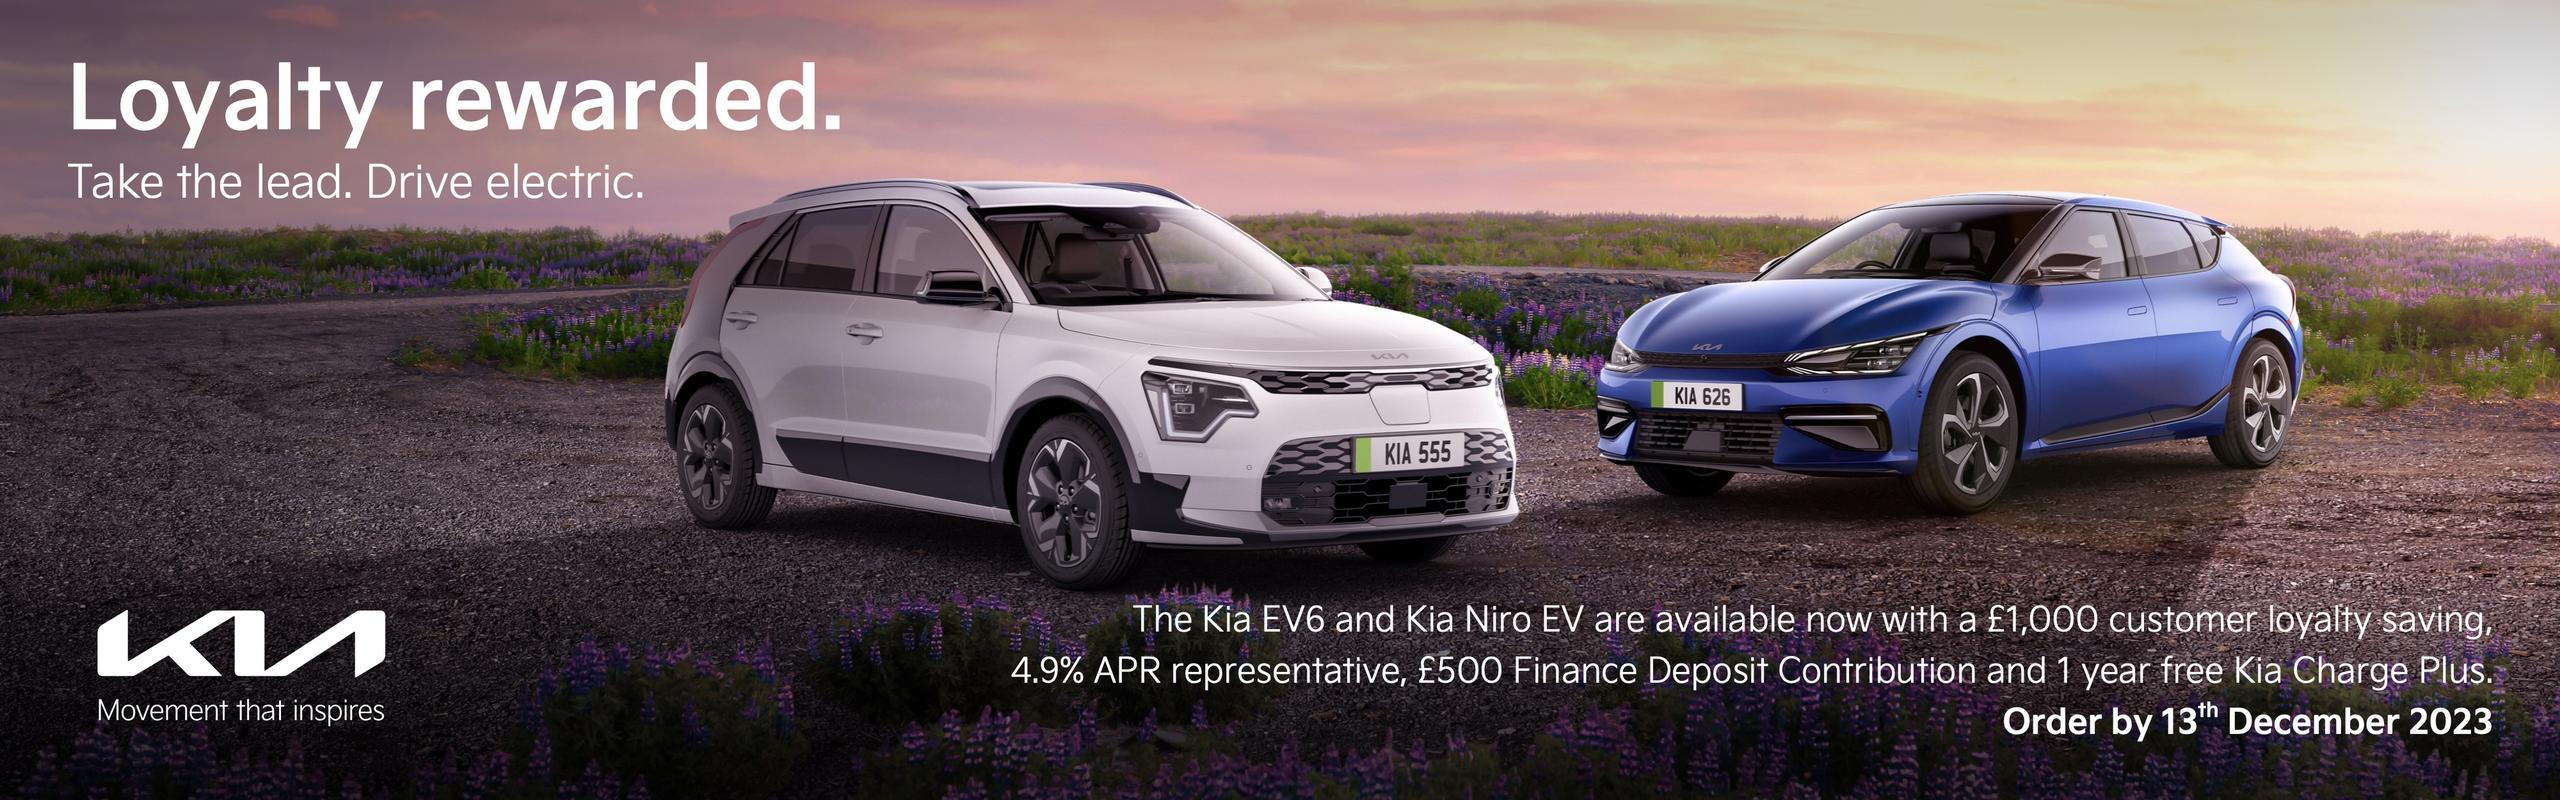 The Kia Loyalty Event. £1,000 off when you already own a Kia. Order by 13st December 2023